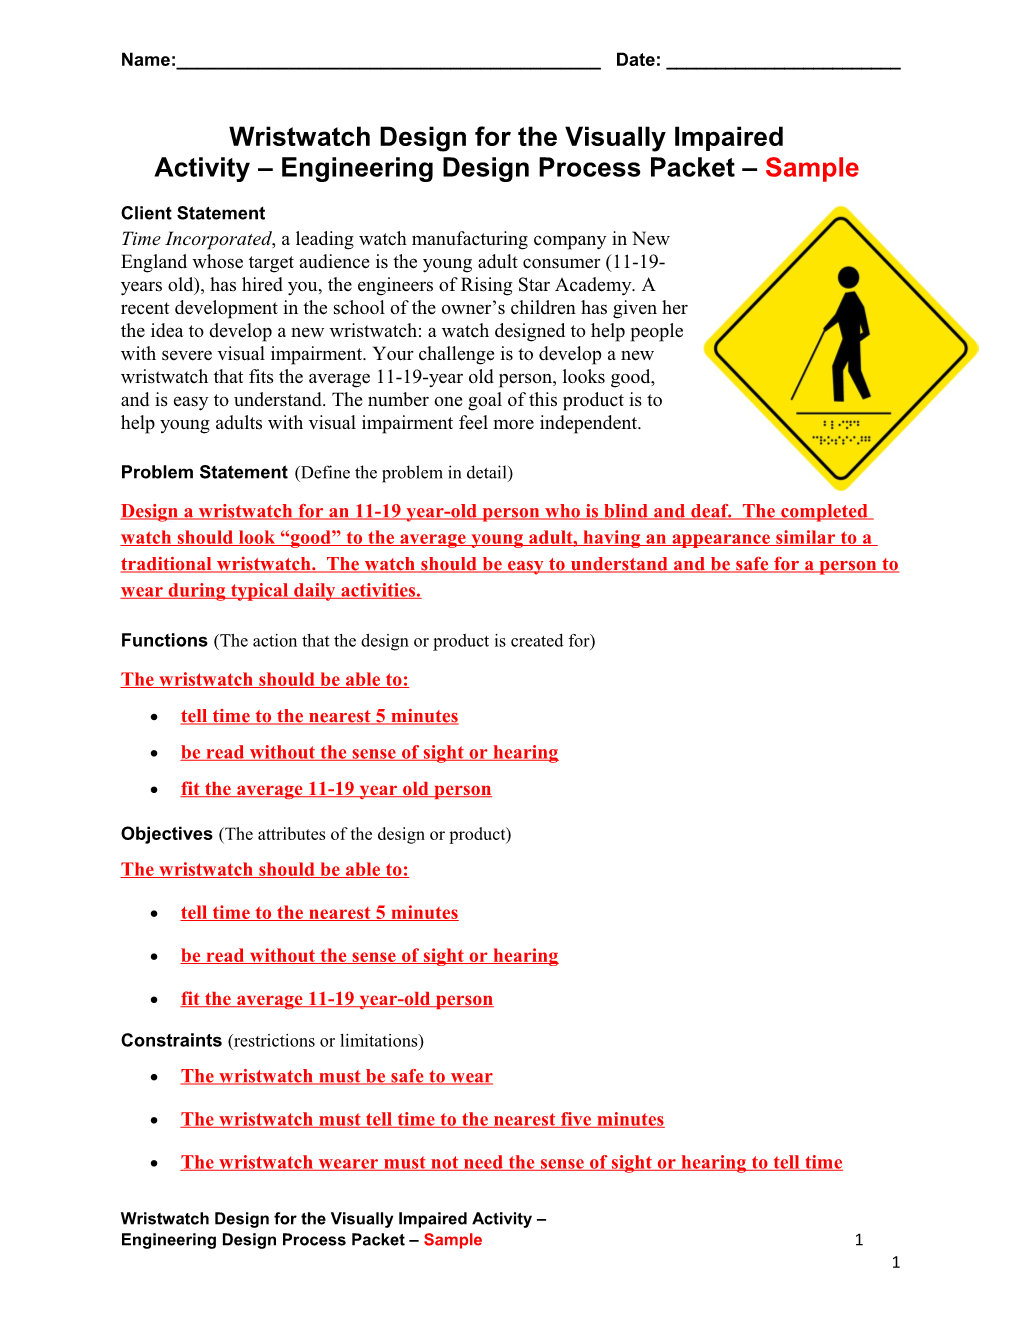 Wristwatch Design for the Visually Impaired Activity Engineering Design Process Packet Sample